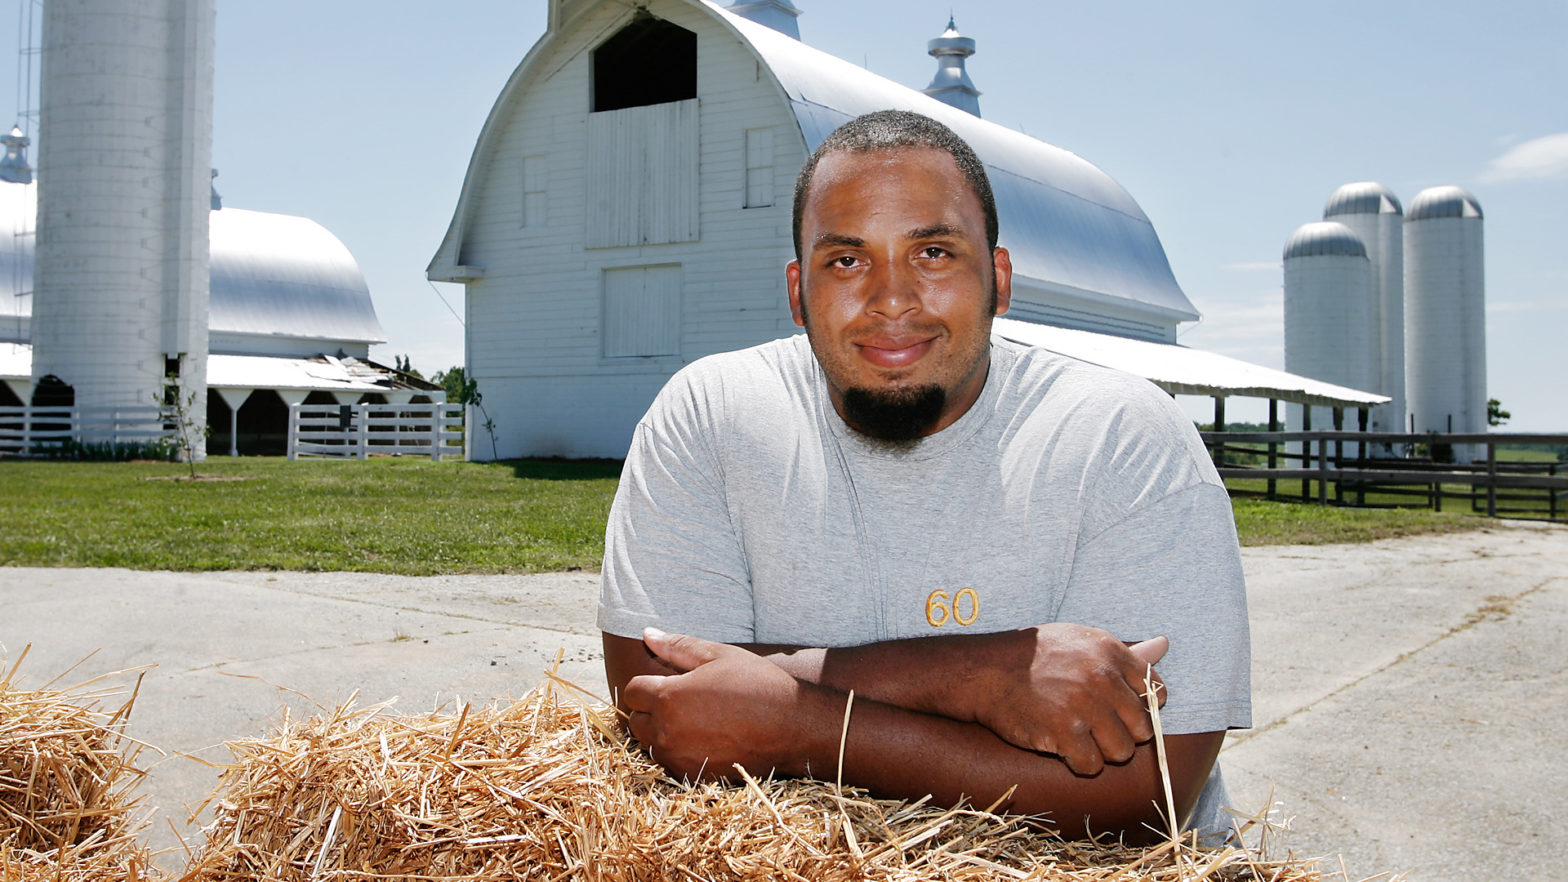 Why Jason Brown, Who Was Once The Highest-Paid Center In The NFL, Walked Away To Become A Farmer